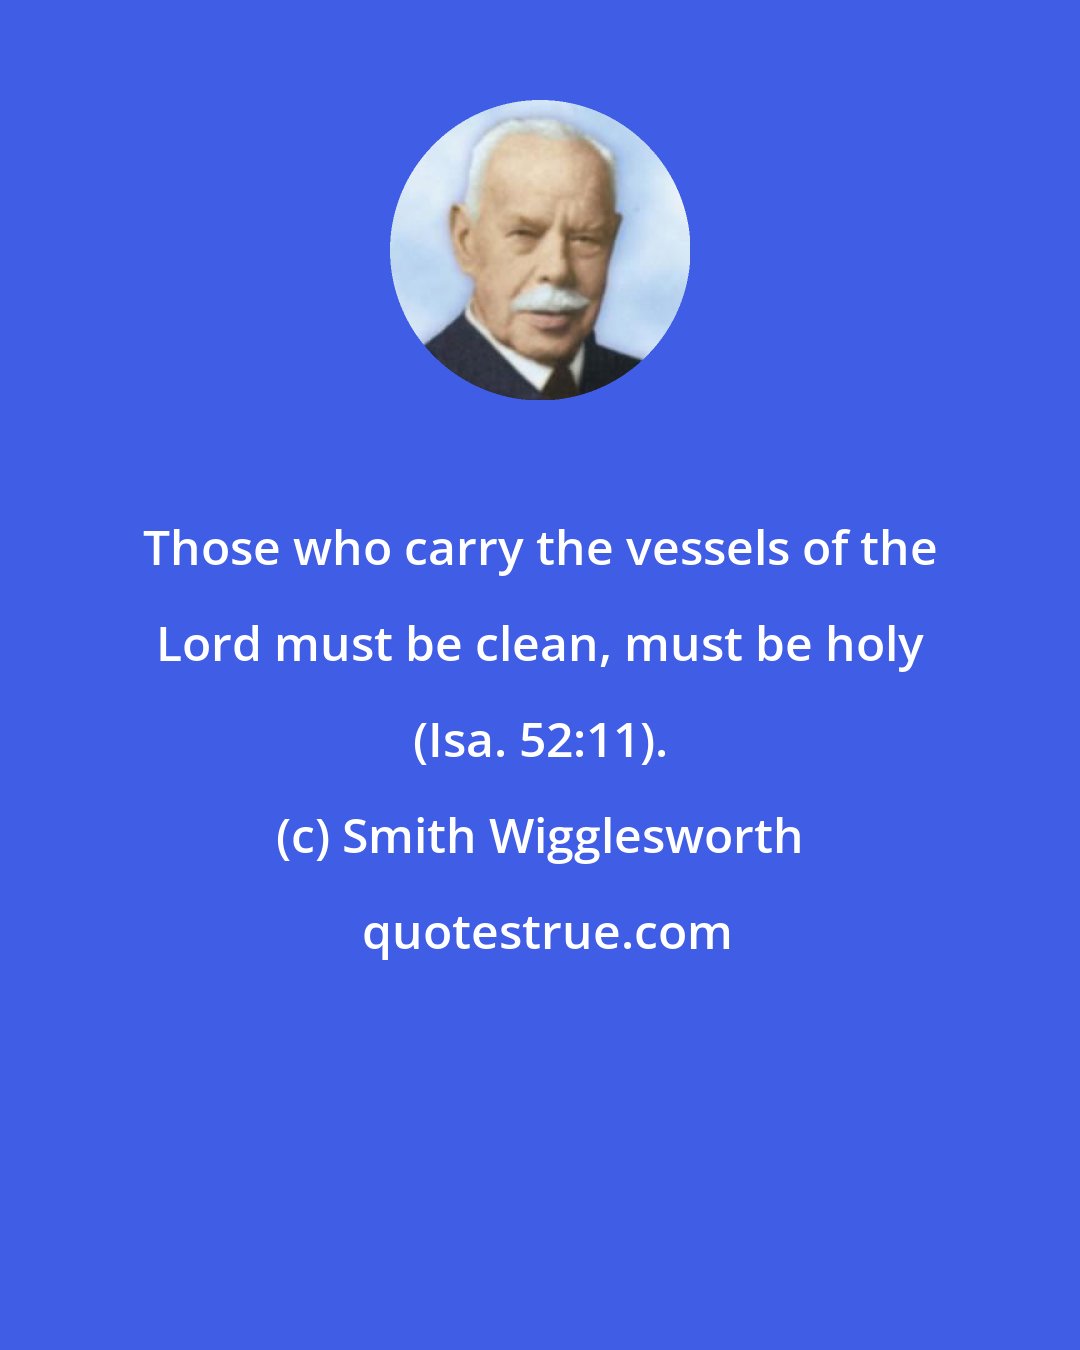 Smith Wigglesworth: Those who carry the vessels of the Lord must be clean, must be holy (Isa. 52:11).